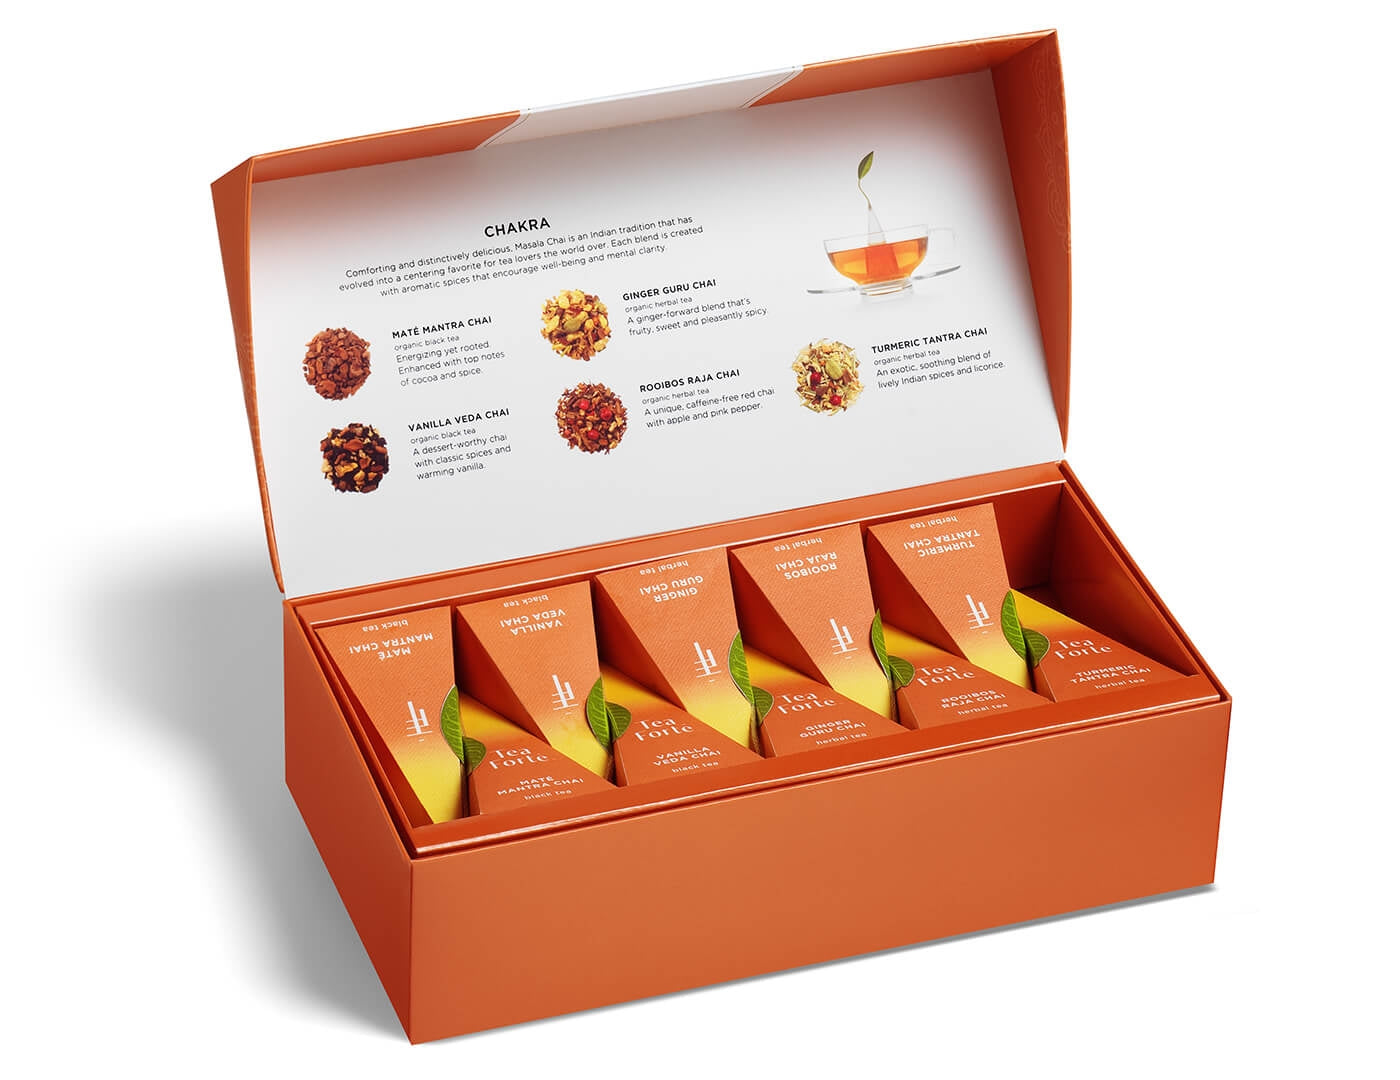 Chakra tea assortment in a 10 count petite presentation box with lid open